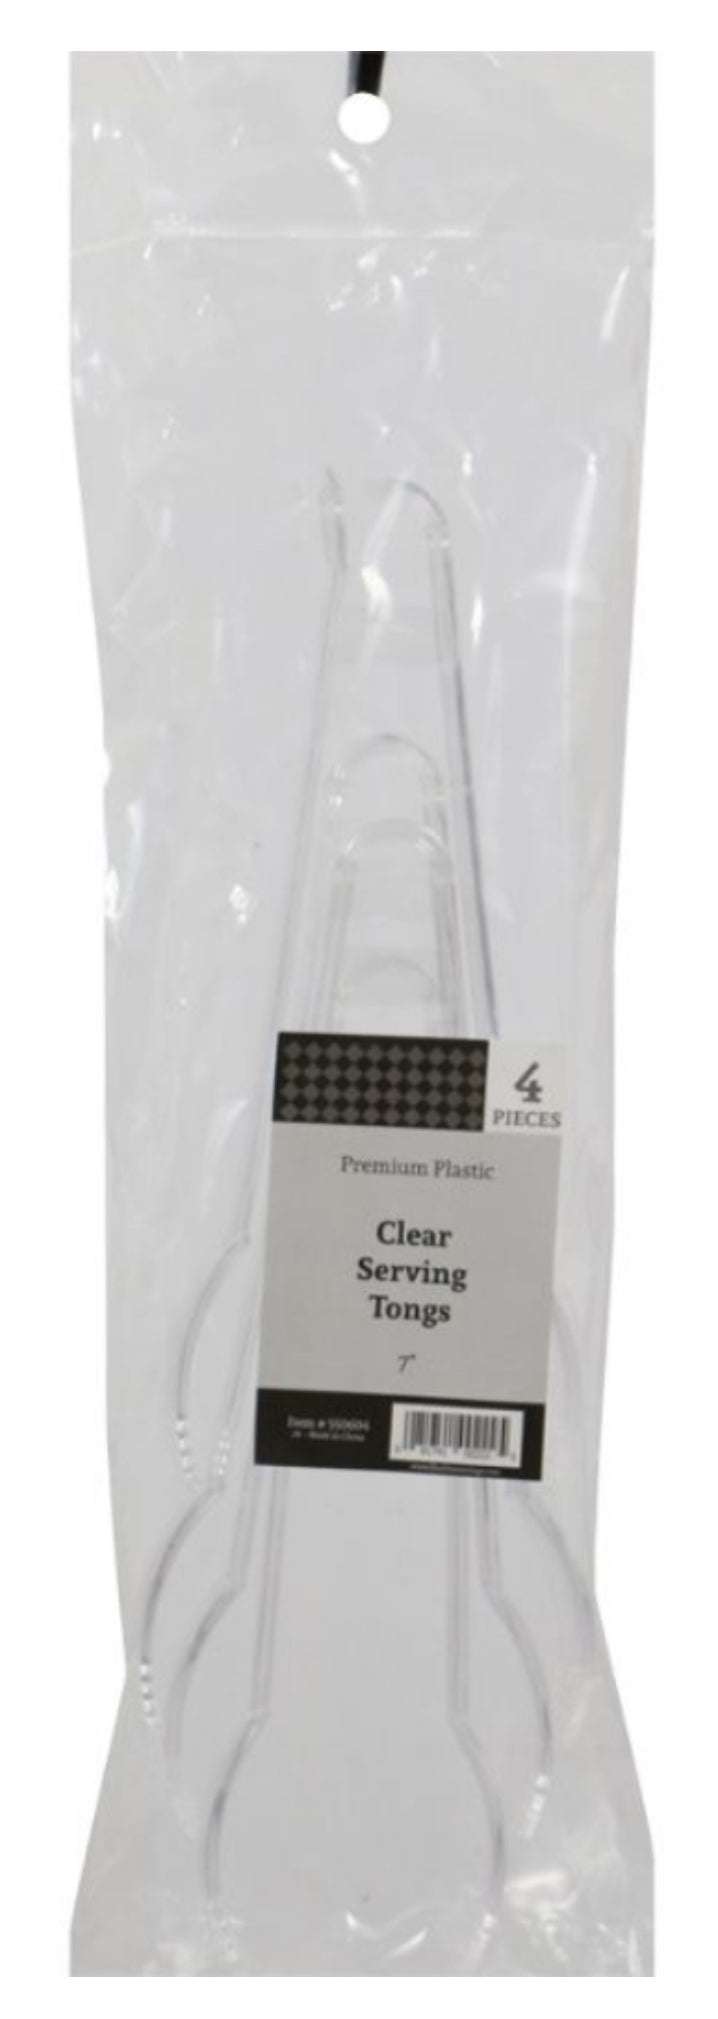 7" Clear Serving Tongs, 4/Pack